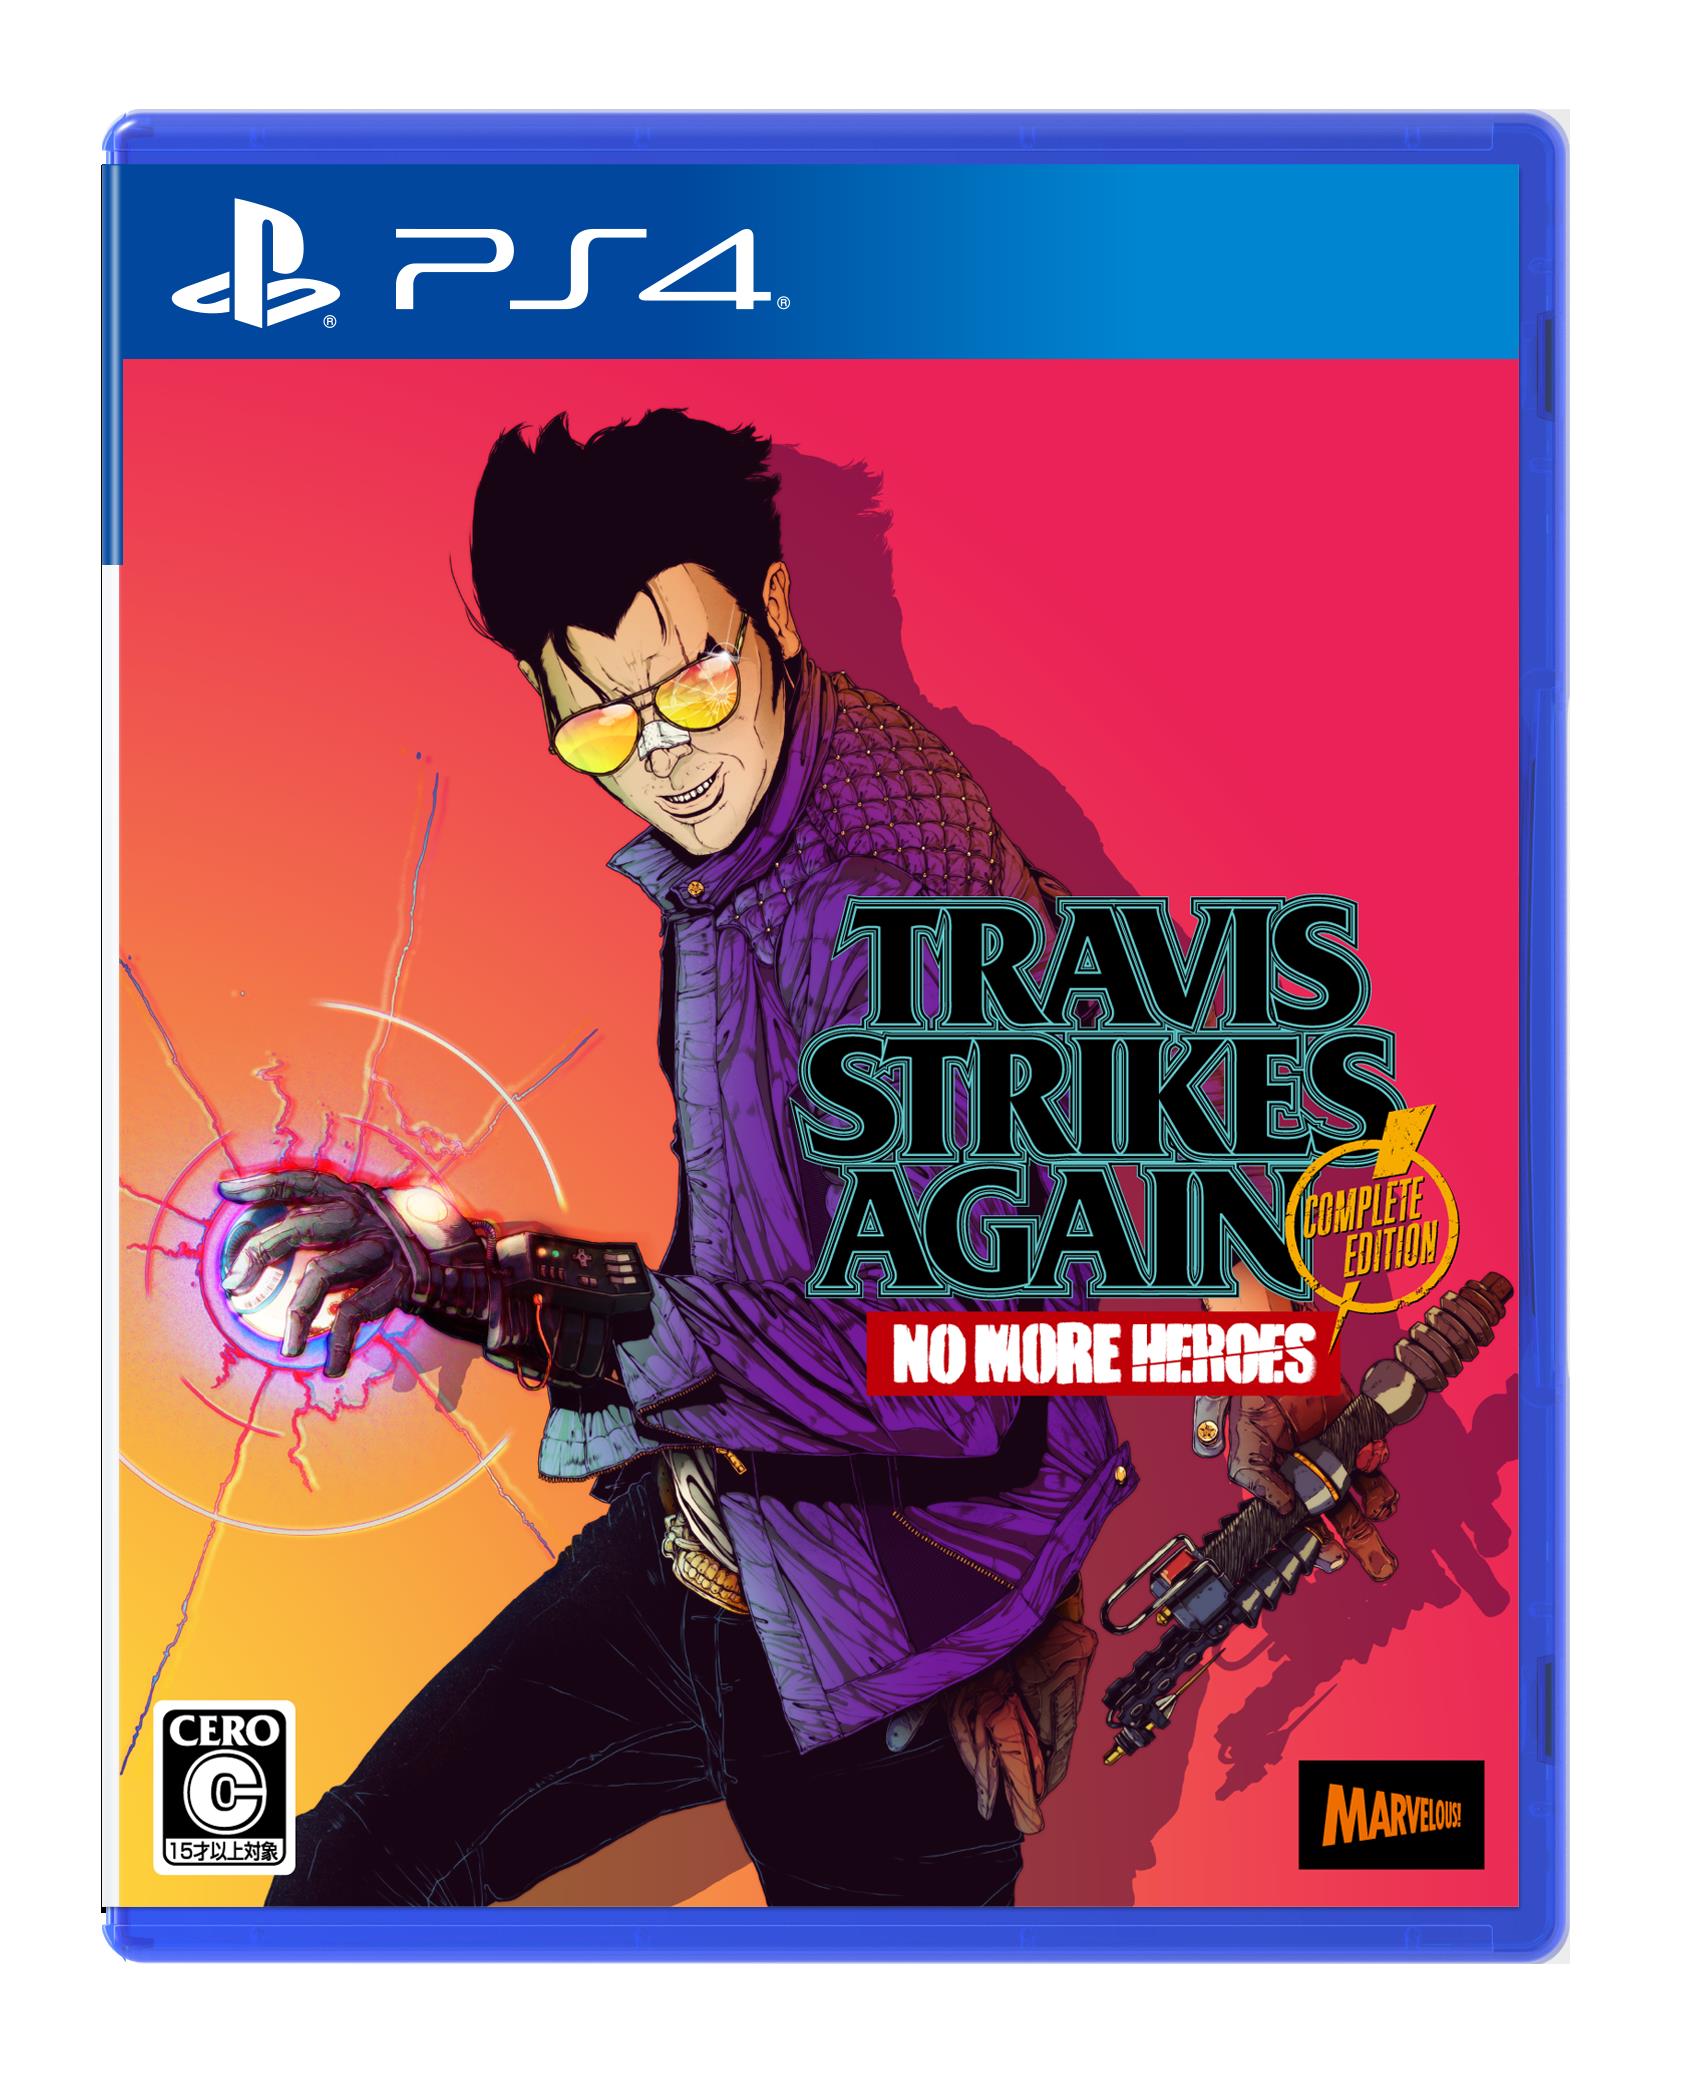 Ps4 Pc版 Travis Strikes Again No More Heroes Complete Edition 発売決定 Game Watch